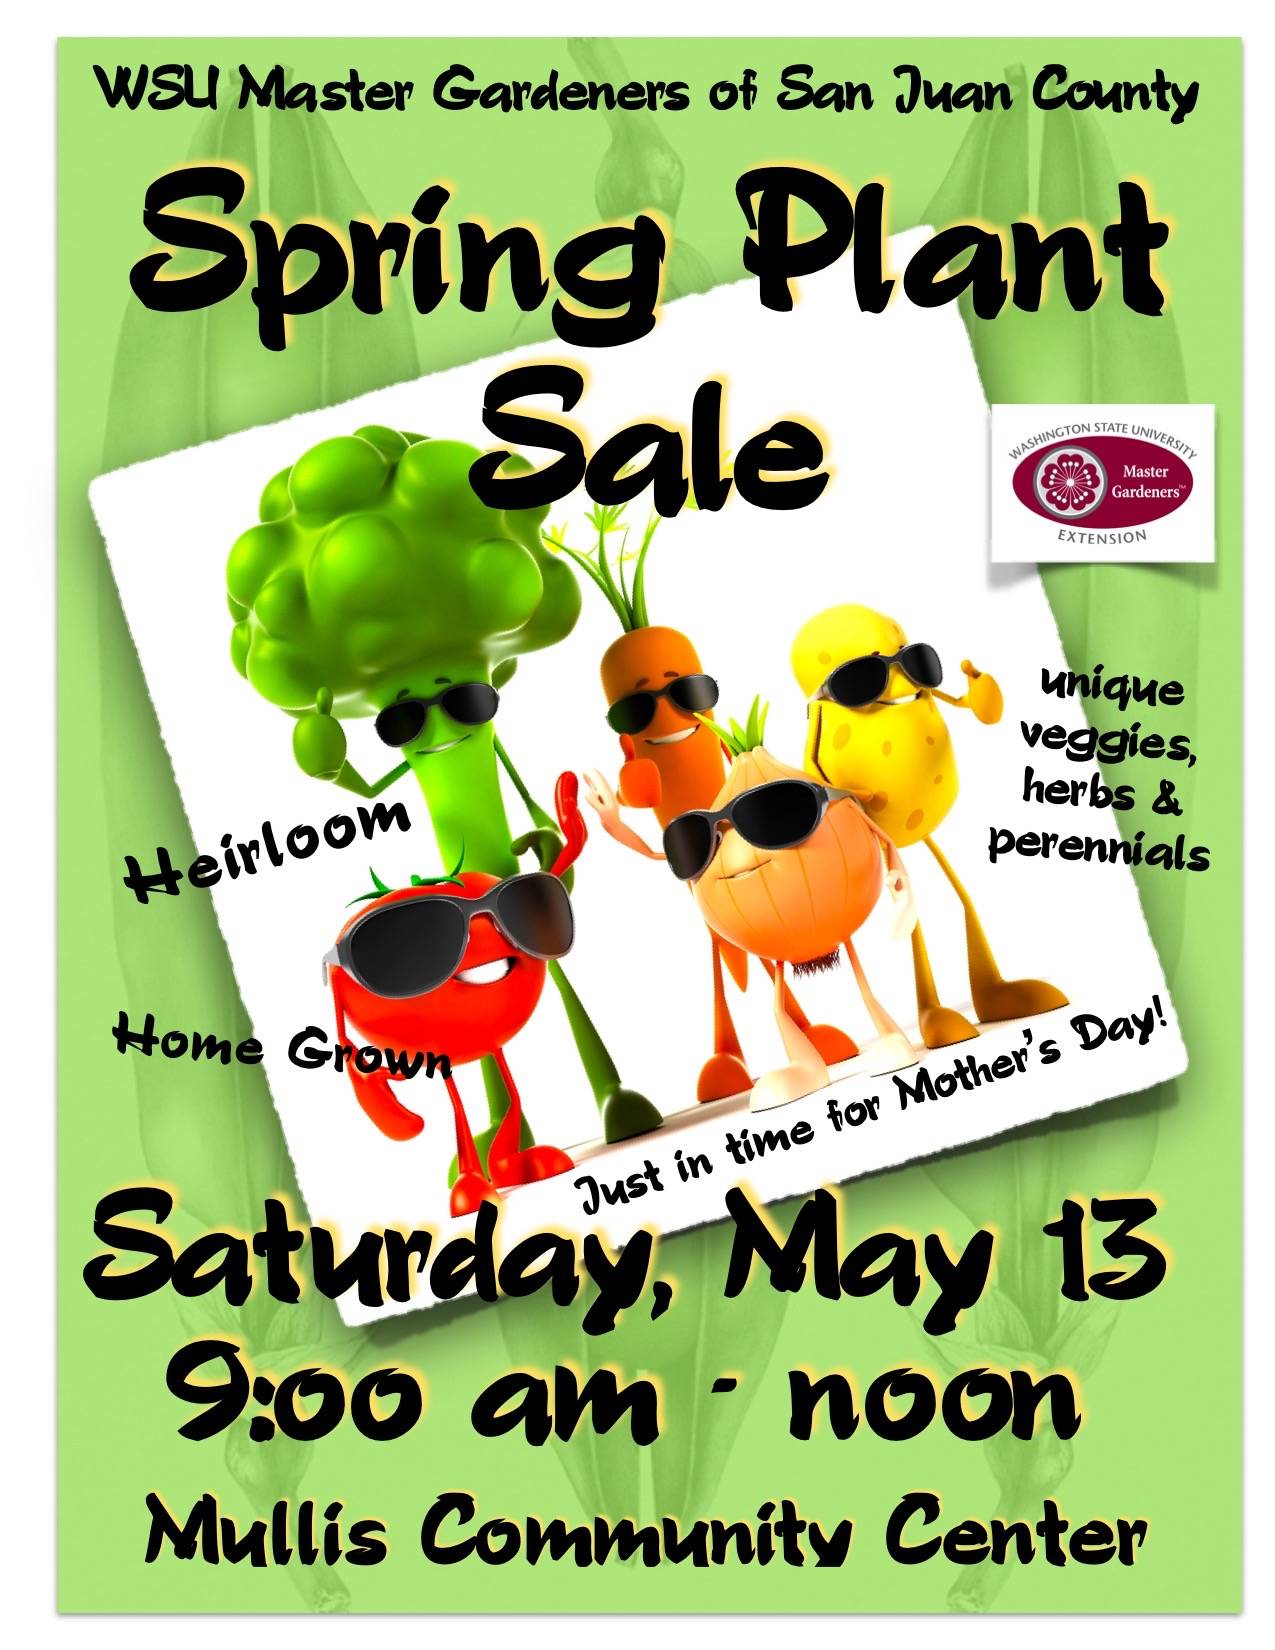 Master gardeners spring plant sale on May 13